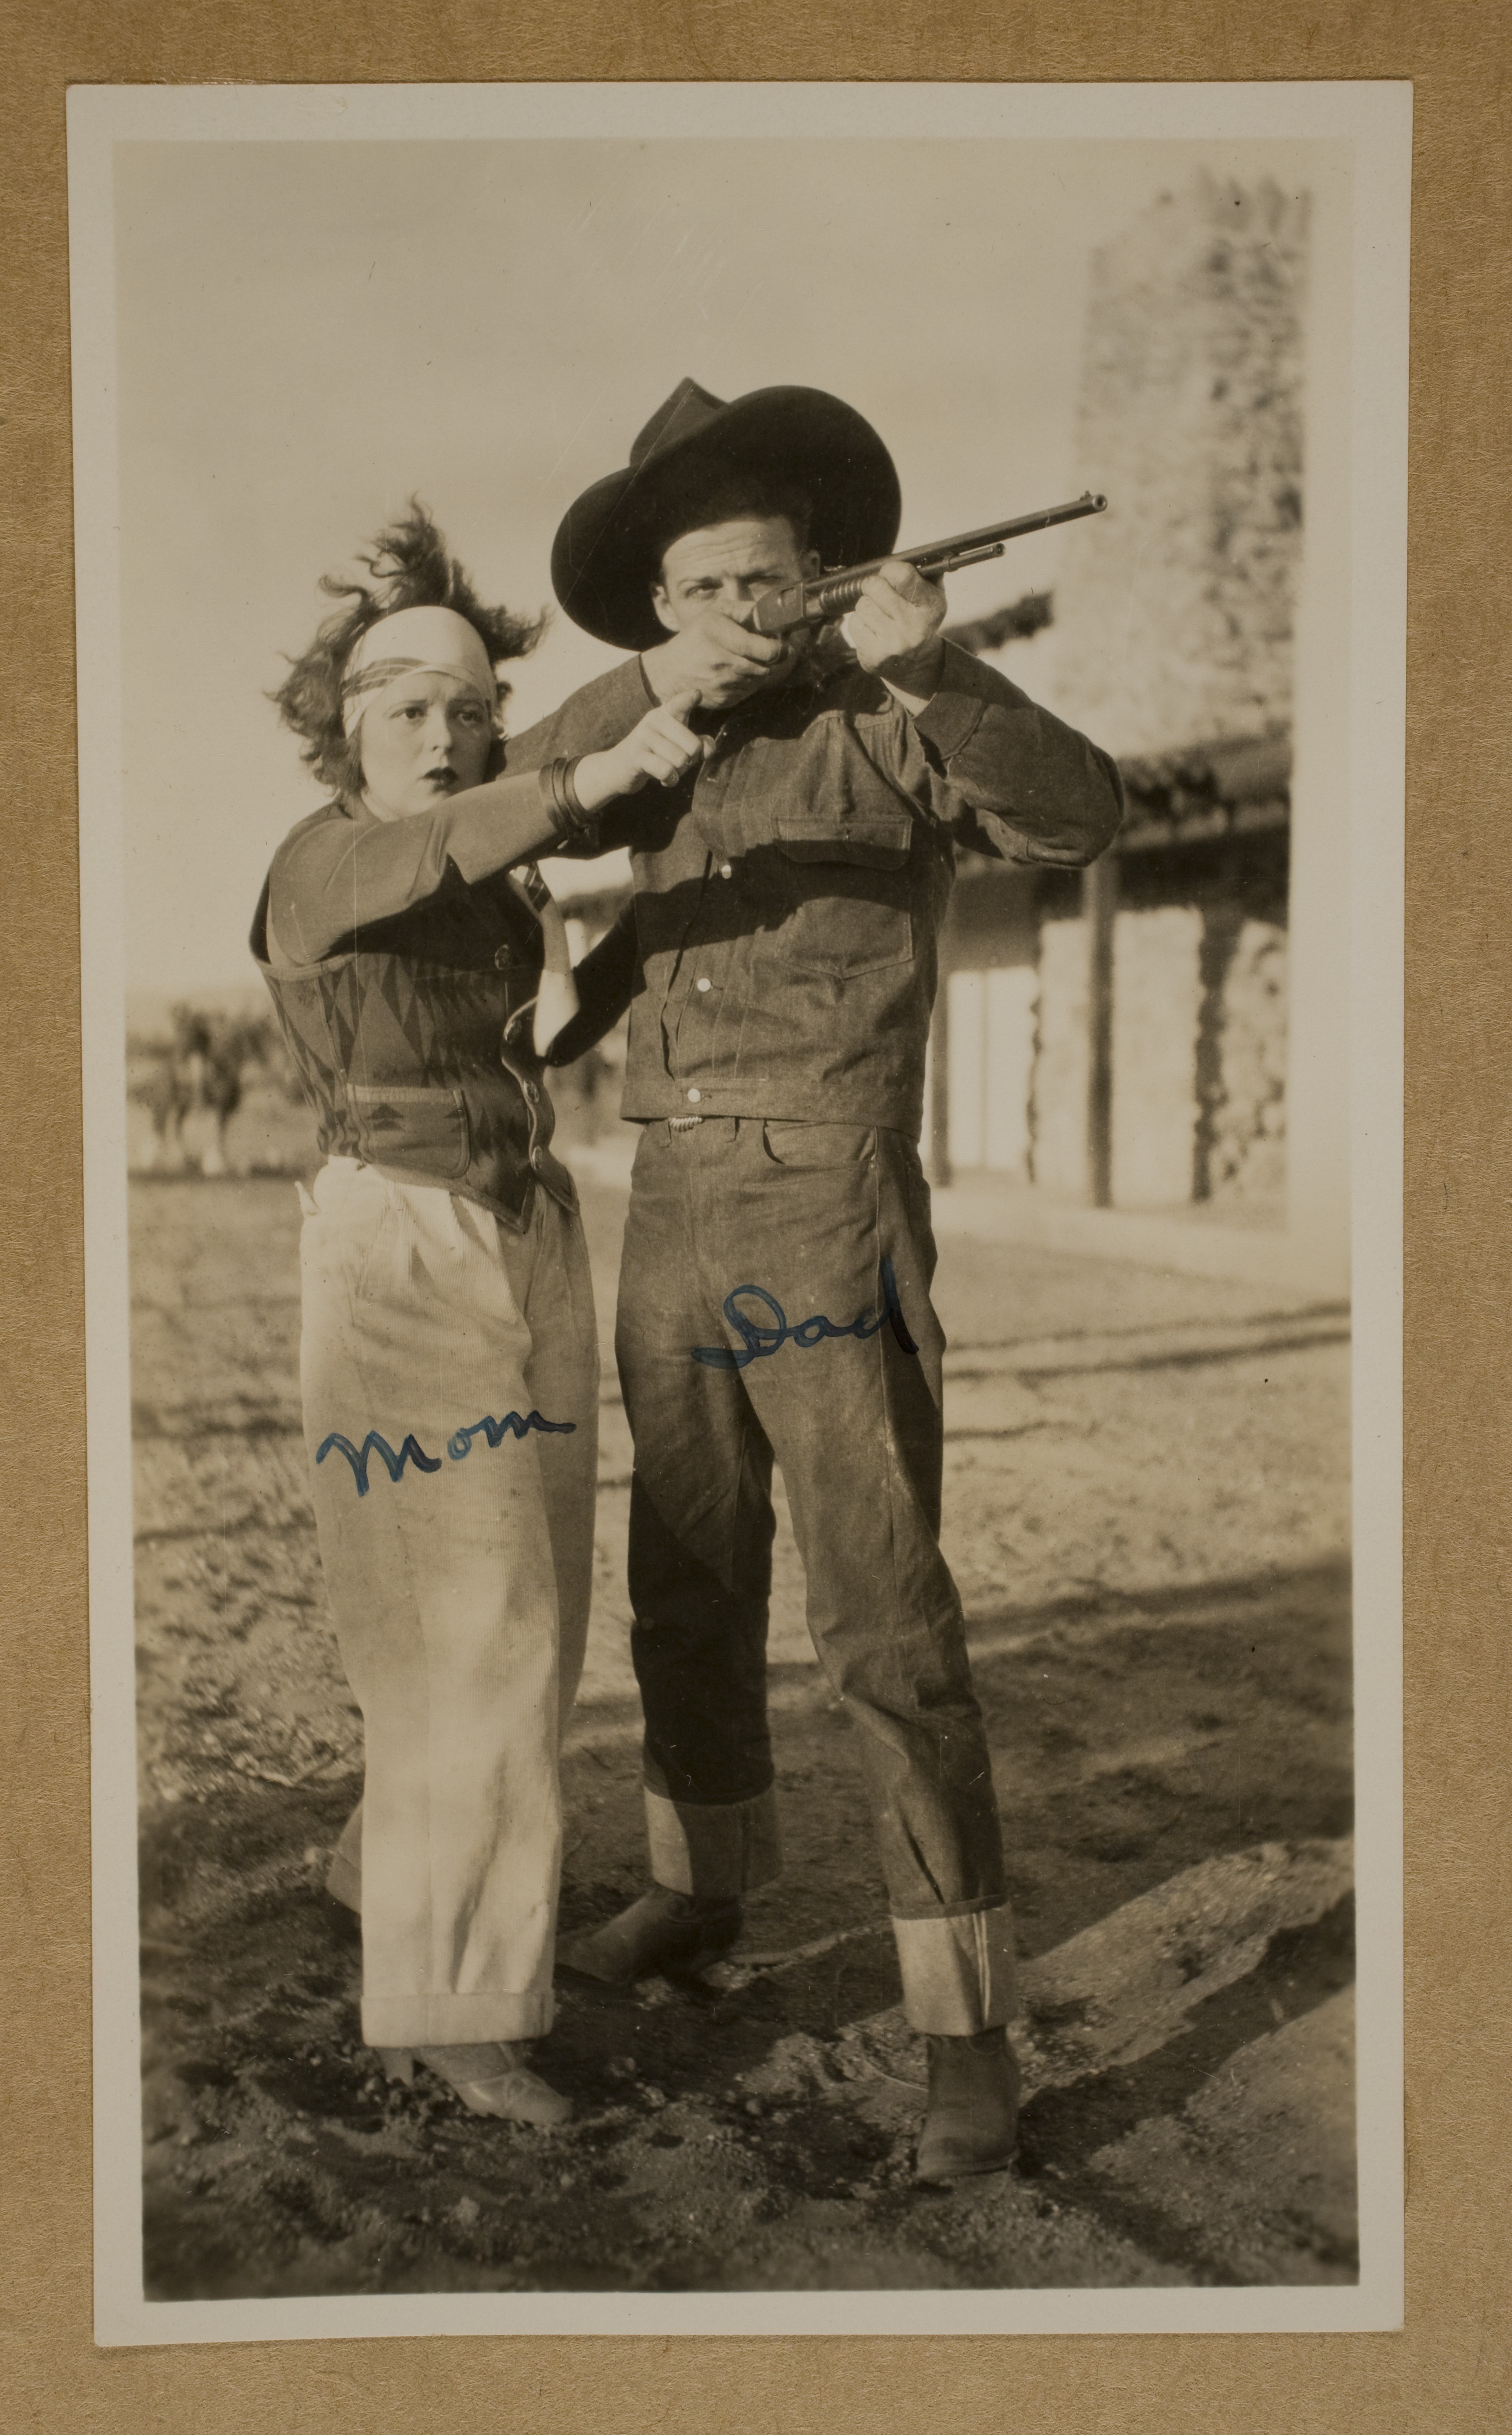 Clara Bow (left) and Rex Bell (George Francis Beldam) (right) at Walking Box Ranch.  Rex is shooting a rifle: photographic print